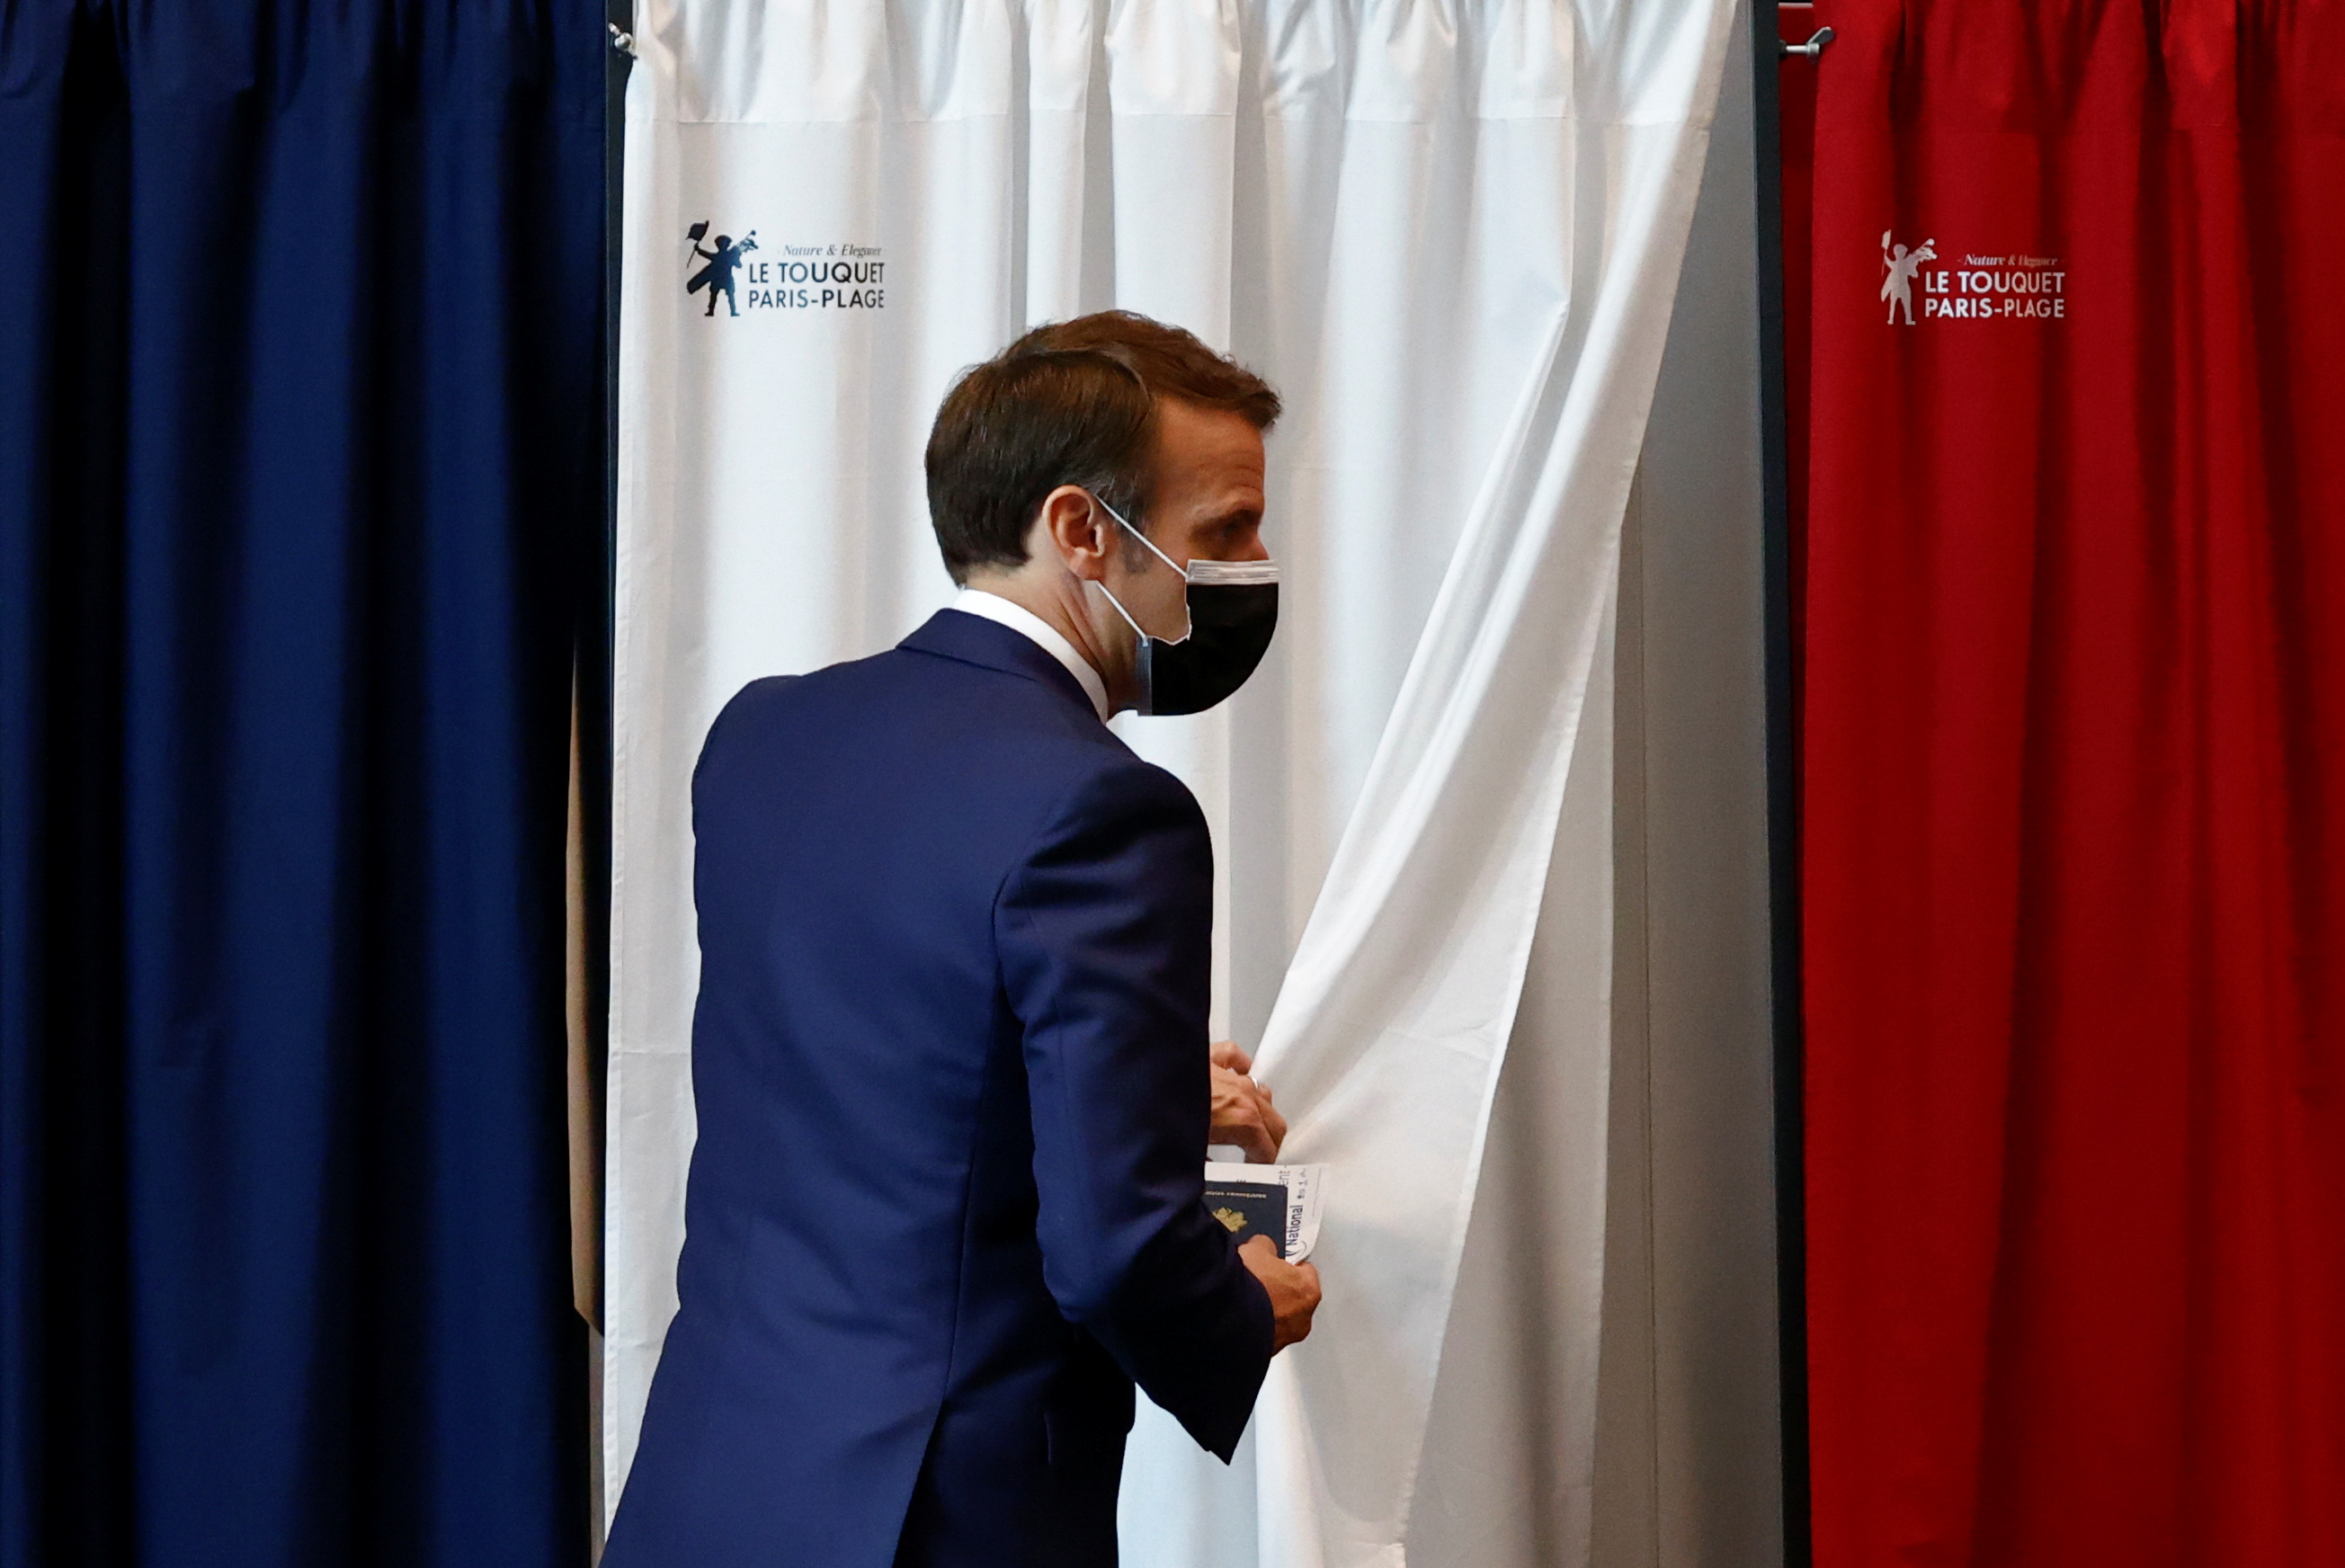 French President Emmanuel Macron is seen at a polling station during the first round of French regional and departmental elections, in Le Touquet-Paris-Plage, France, June 20, 2021. REUTERS/Christian Hartmann/Pool